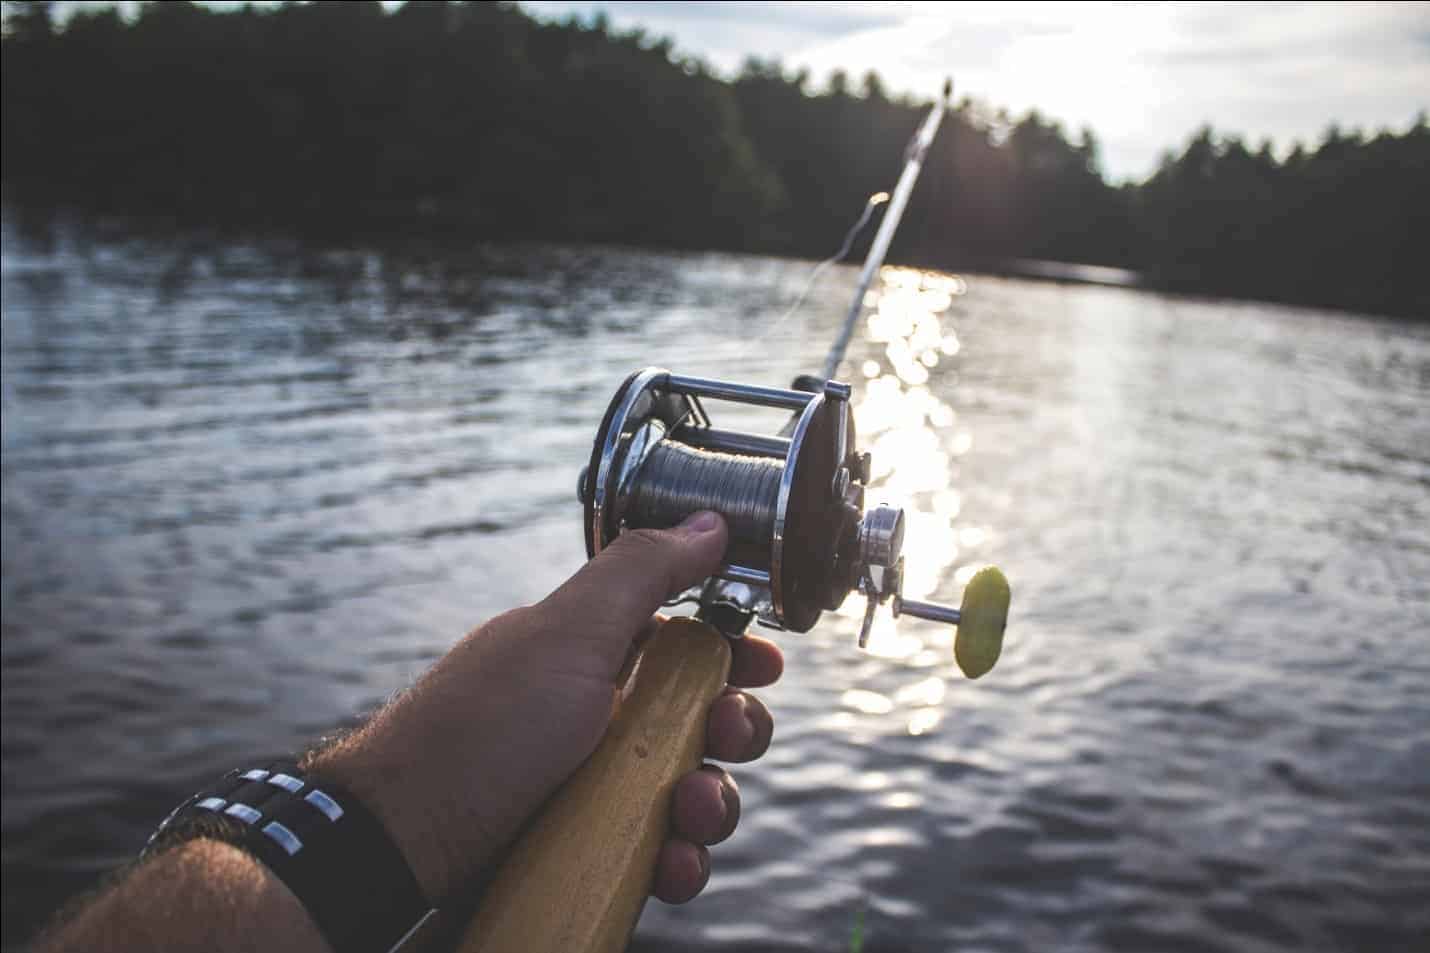 How To Fix Loose Reel Handle? - Fishing Rods, Reels, Line, and